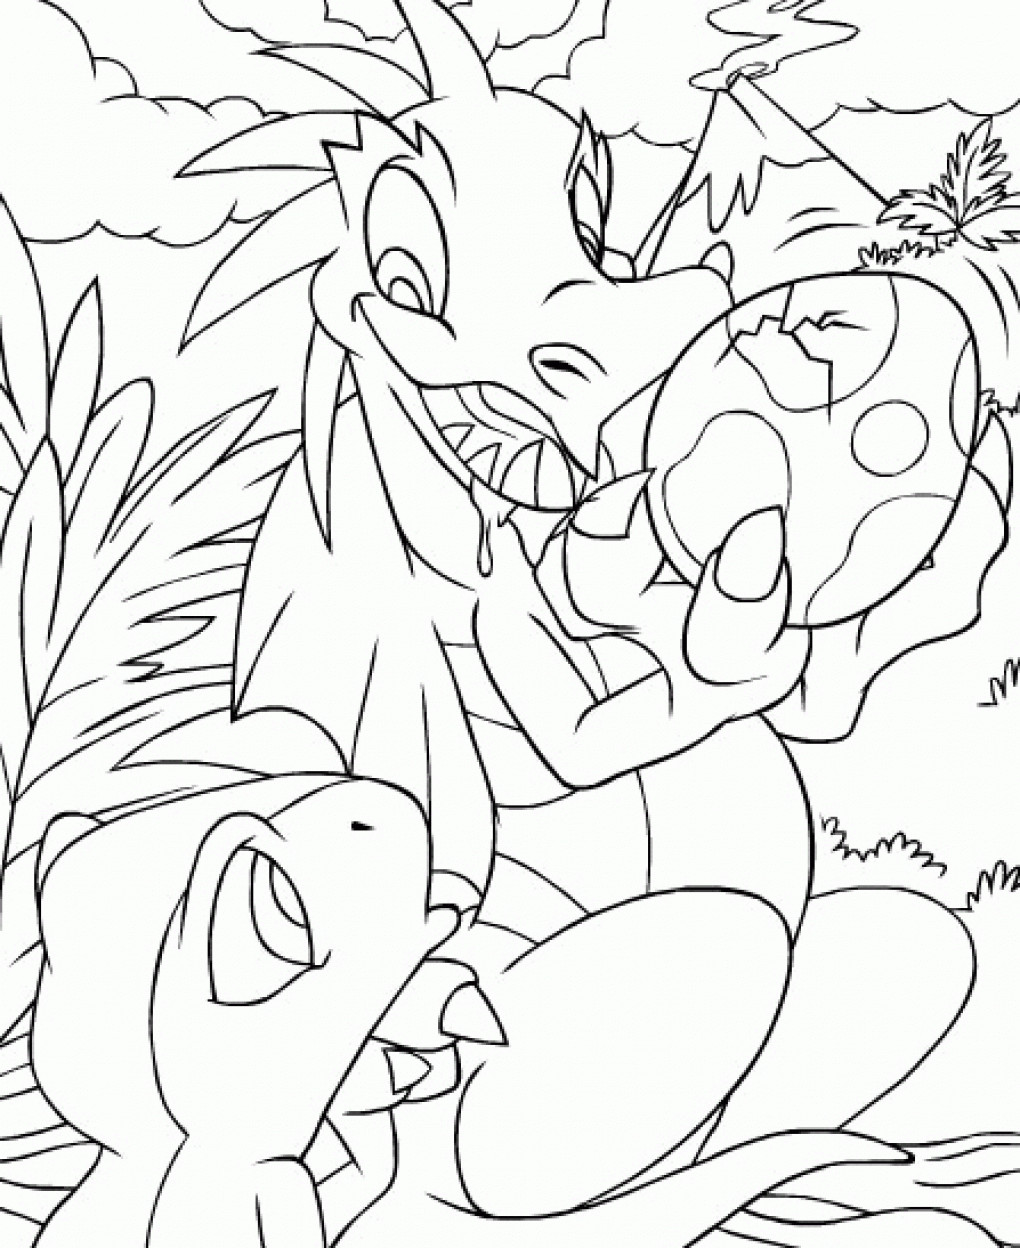 Free Printable Coloring Pages For Children
 Free Printable Neopets Coloring Pages For kids